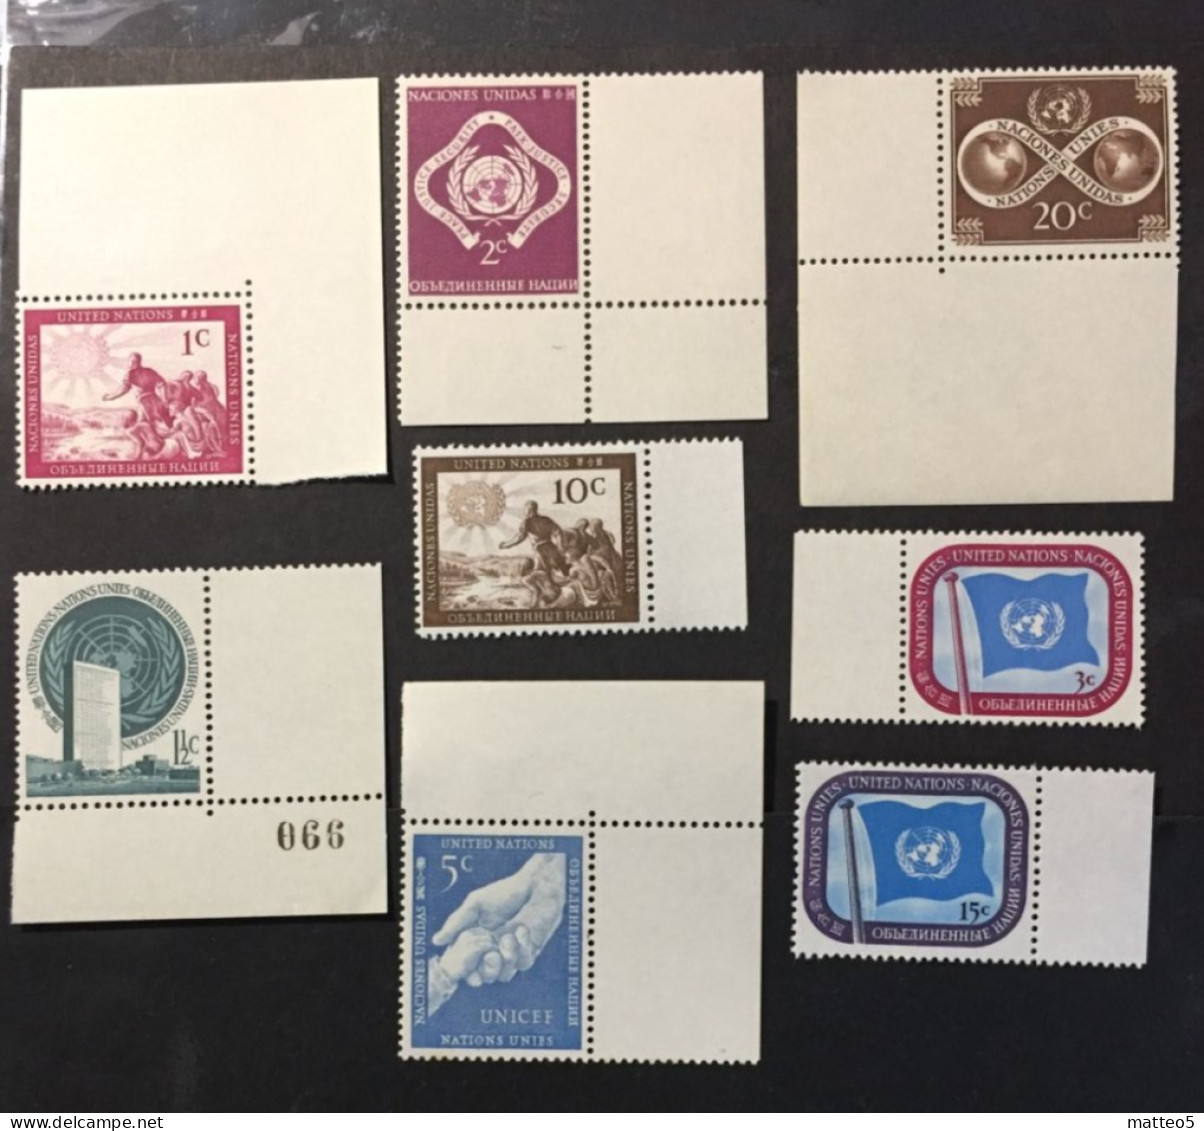 1951 - United Nations UNO UN ONU - 8 Stamps Of The Year 1951 -  Unused - Neufs